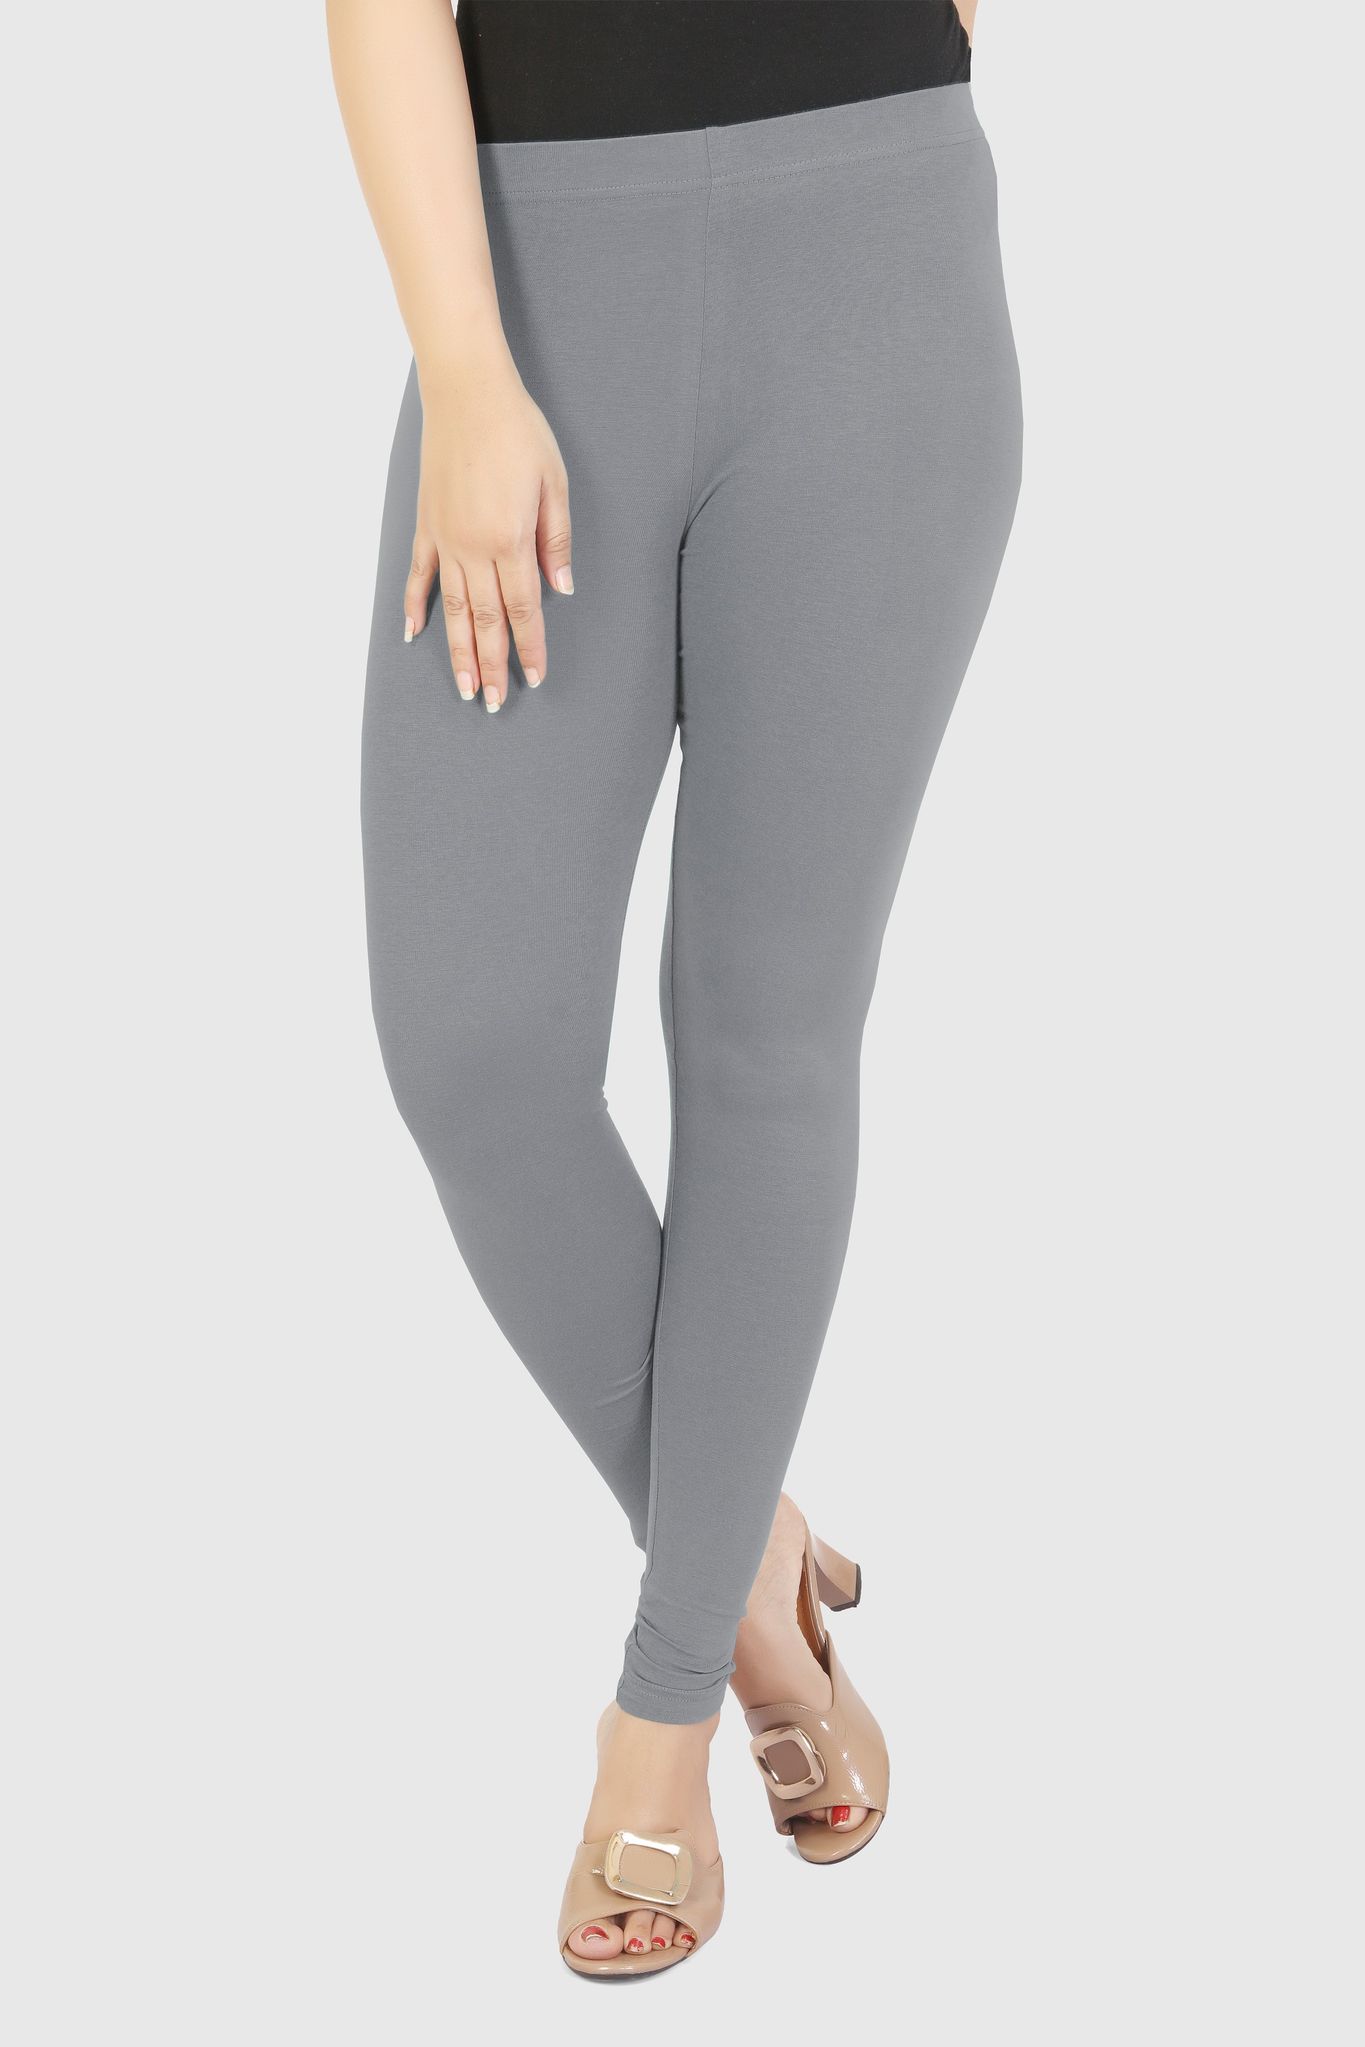 Gray Cotton Lycra Ankle Length Legging, Size: XL & XXL at Rs 190 in Chennai